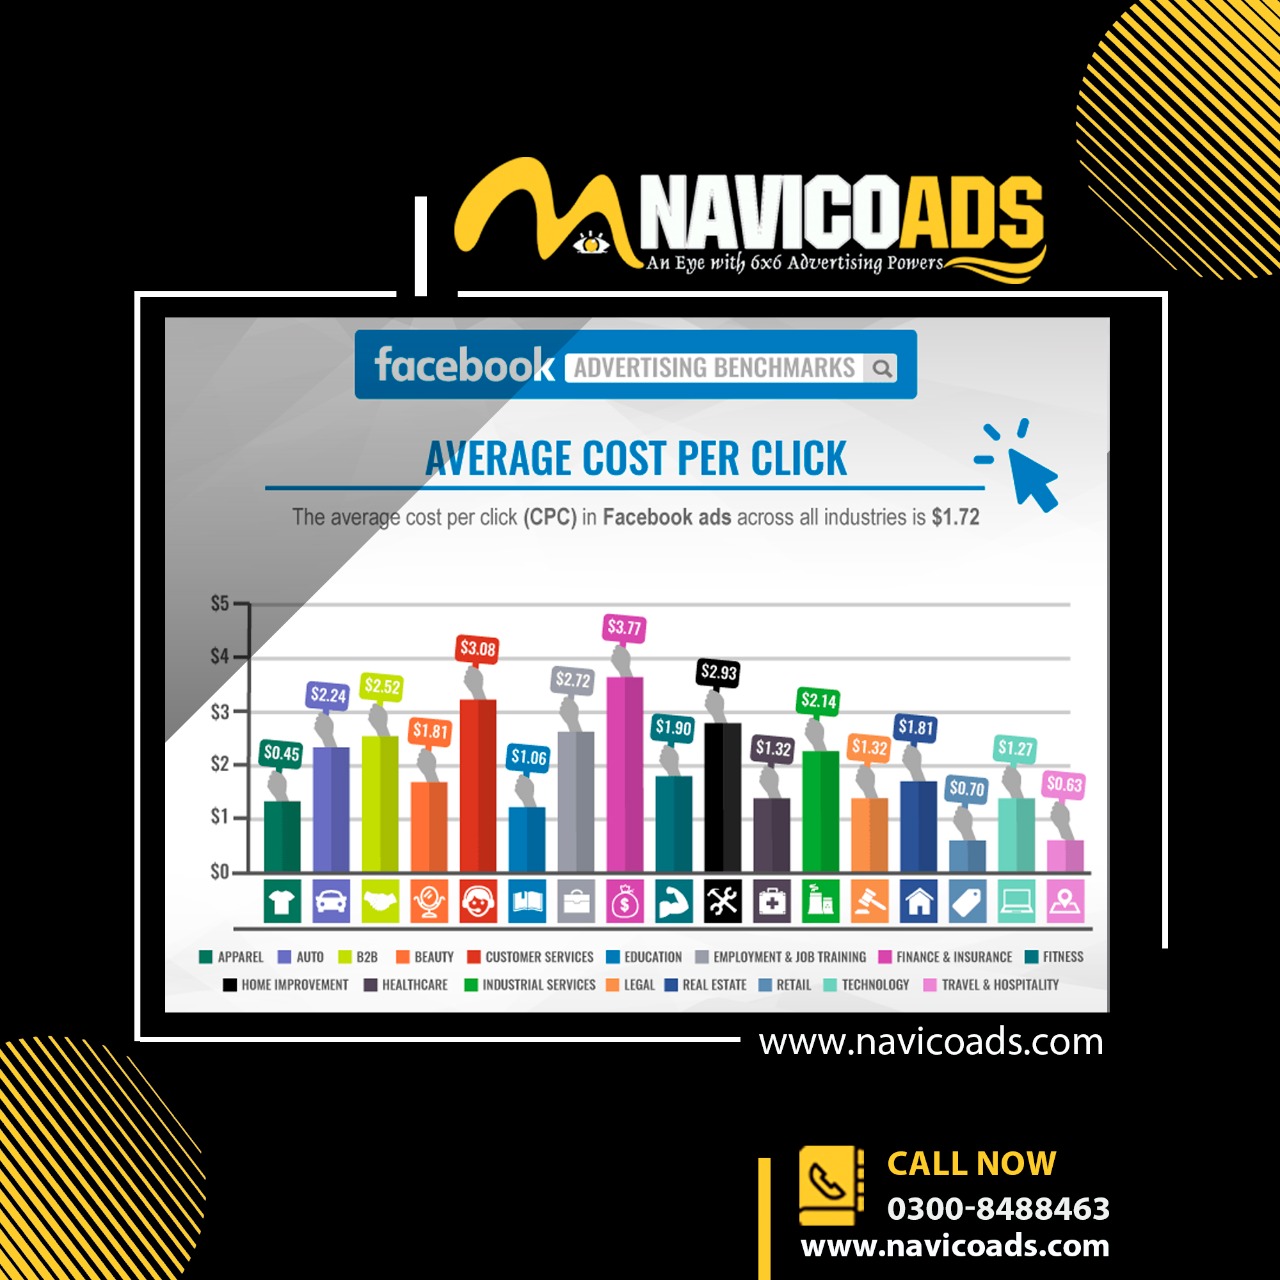 social media marketing charges in pakistan-average cost per click